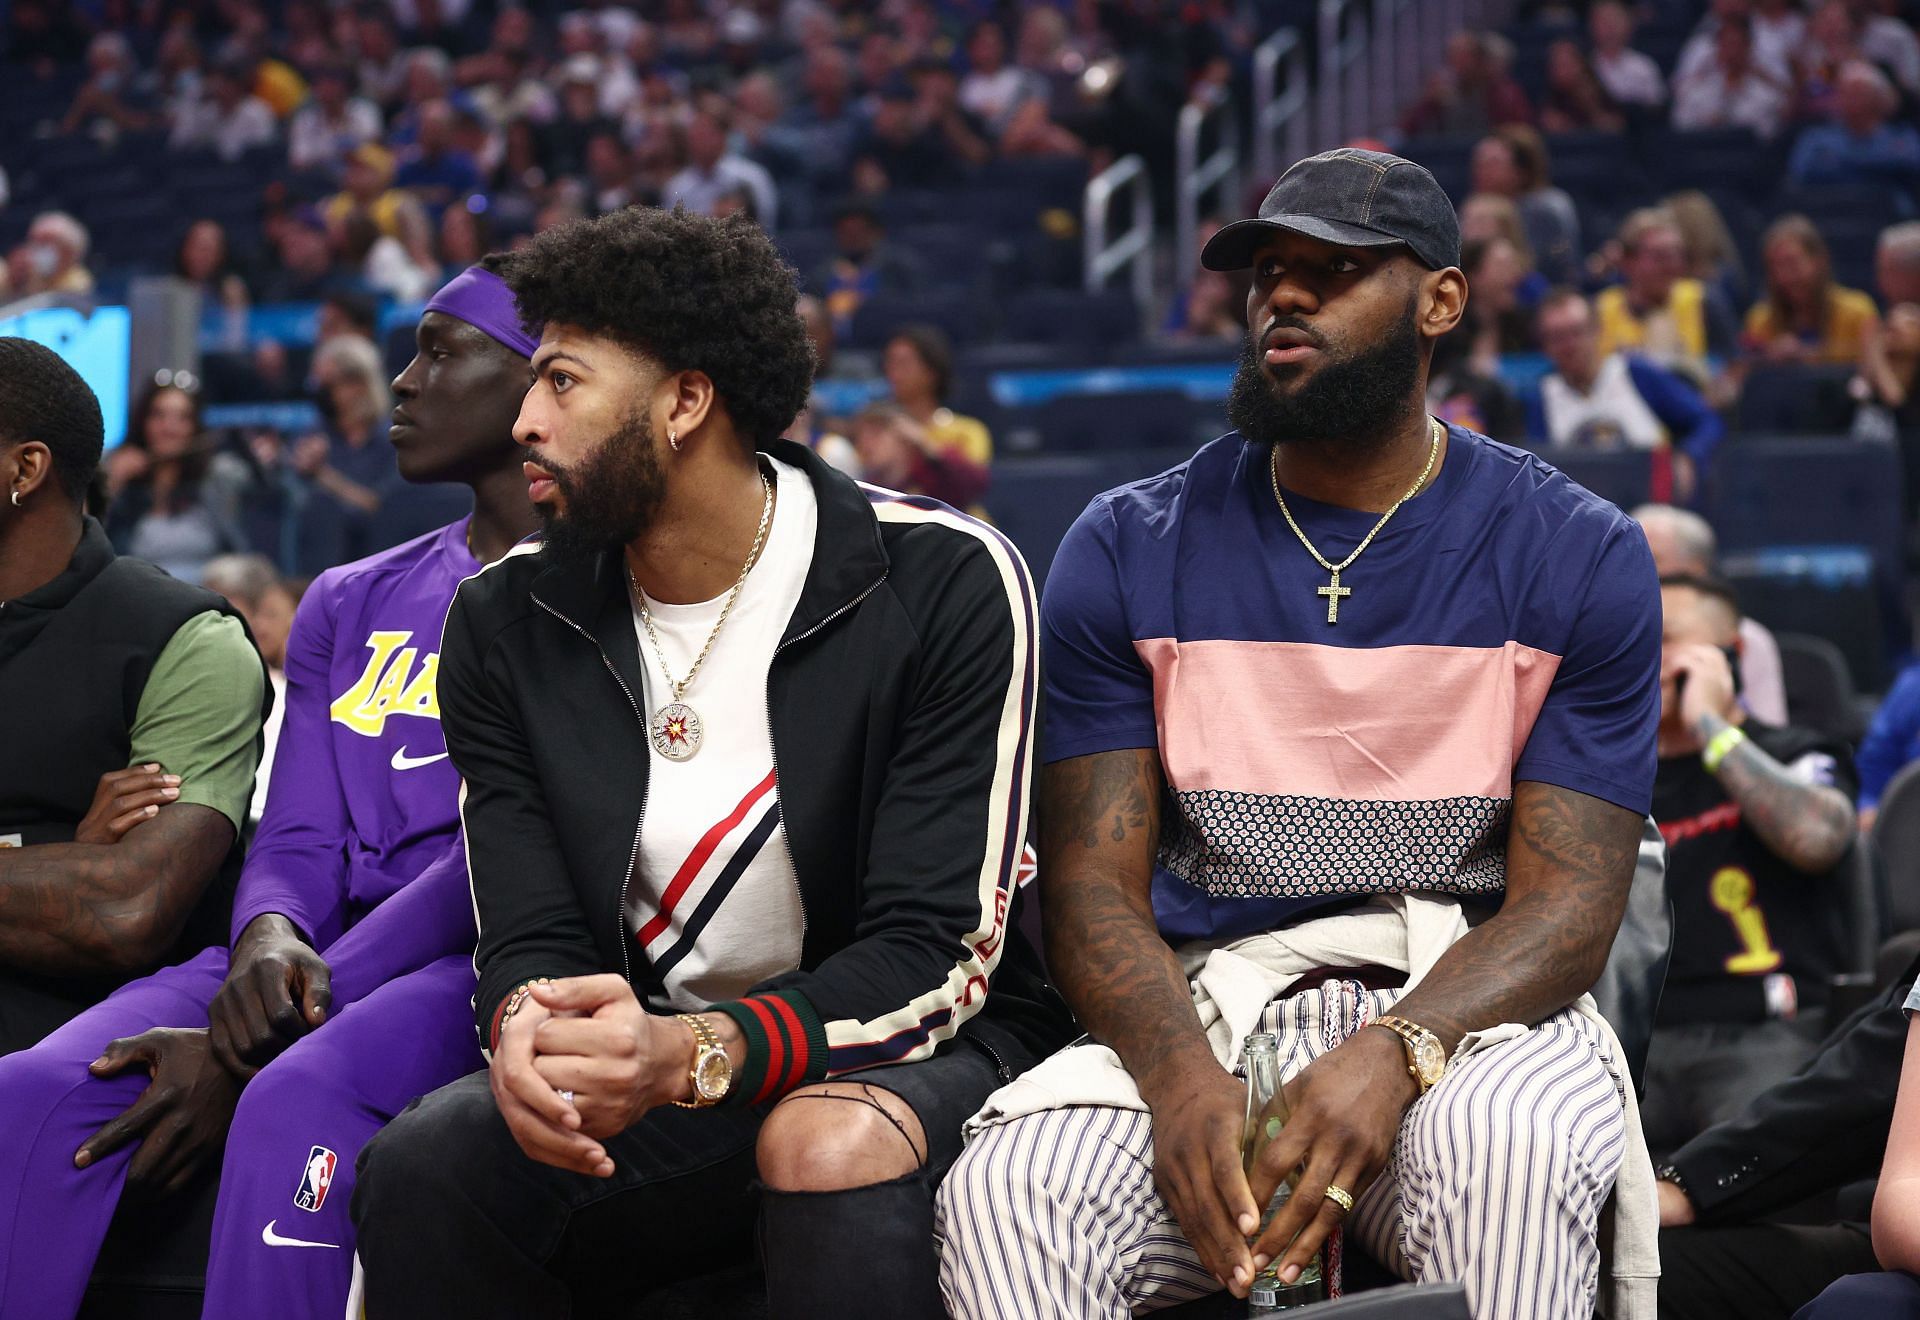 Los Angeles Lakers vs. Golden State Warriors; LeBron James and Anthony Davis sidelined.